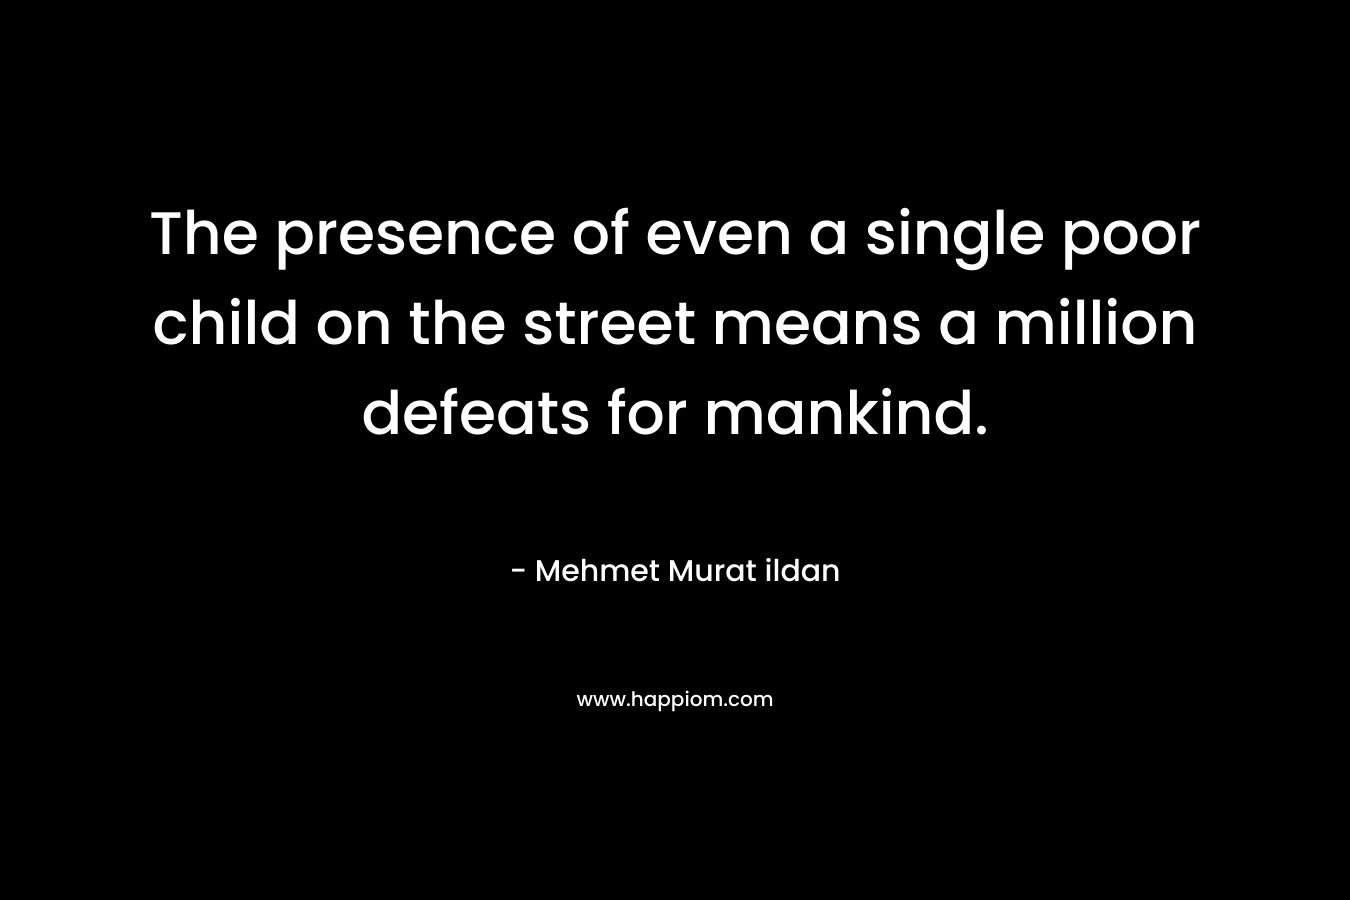 The presence of even a single poor child on the street means a million defeats for mankind. – Mehmet Murat ildan